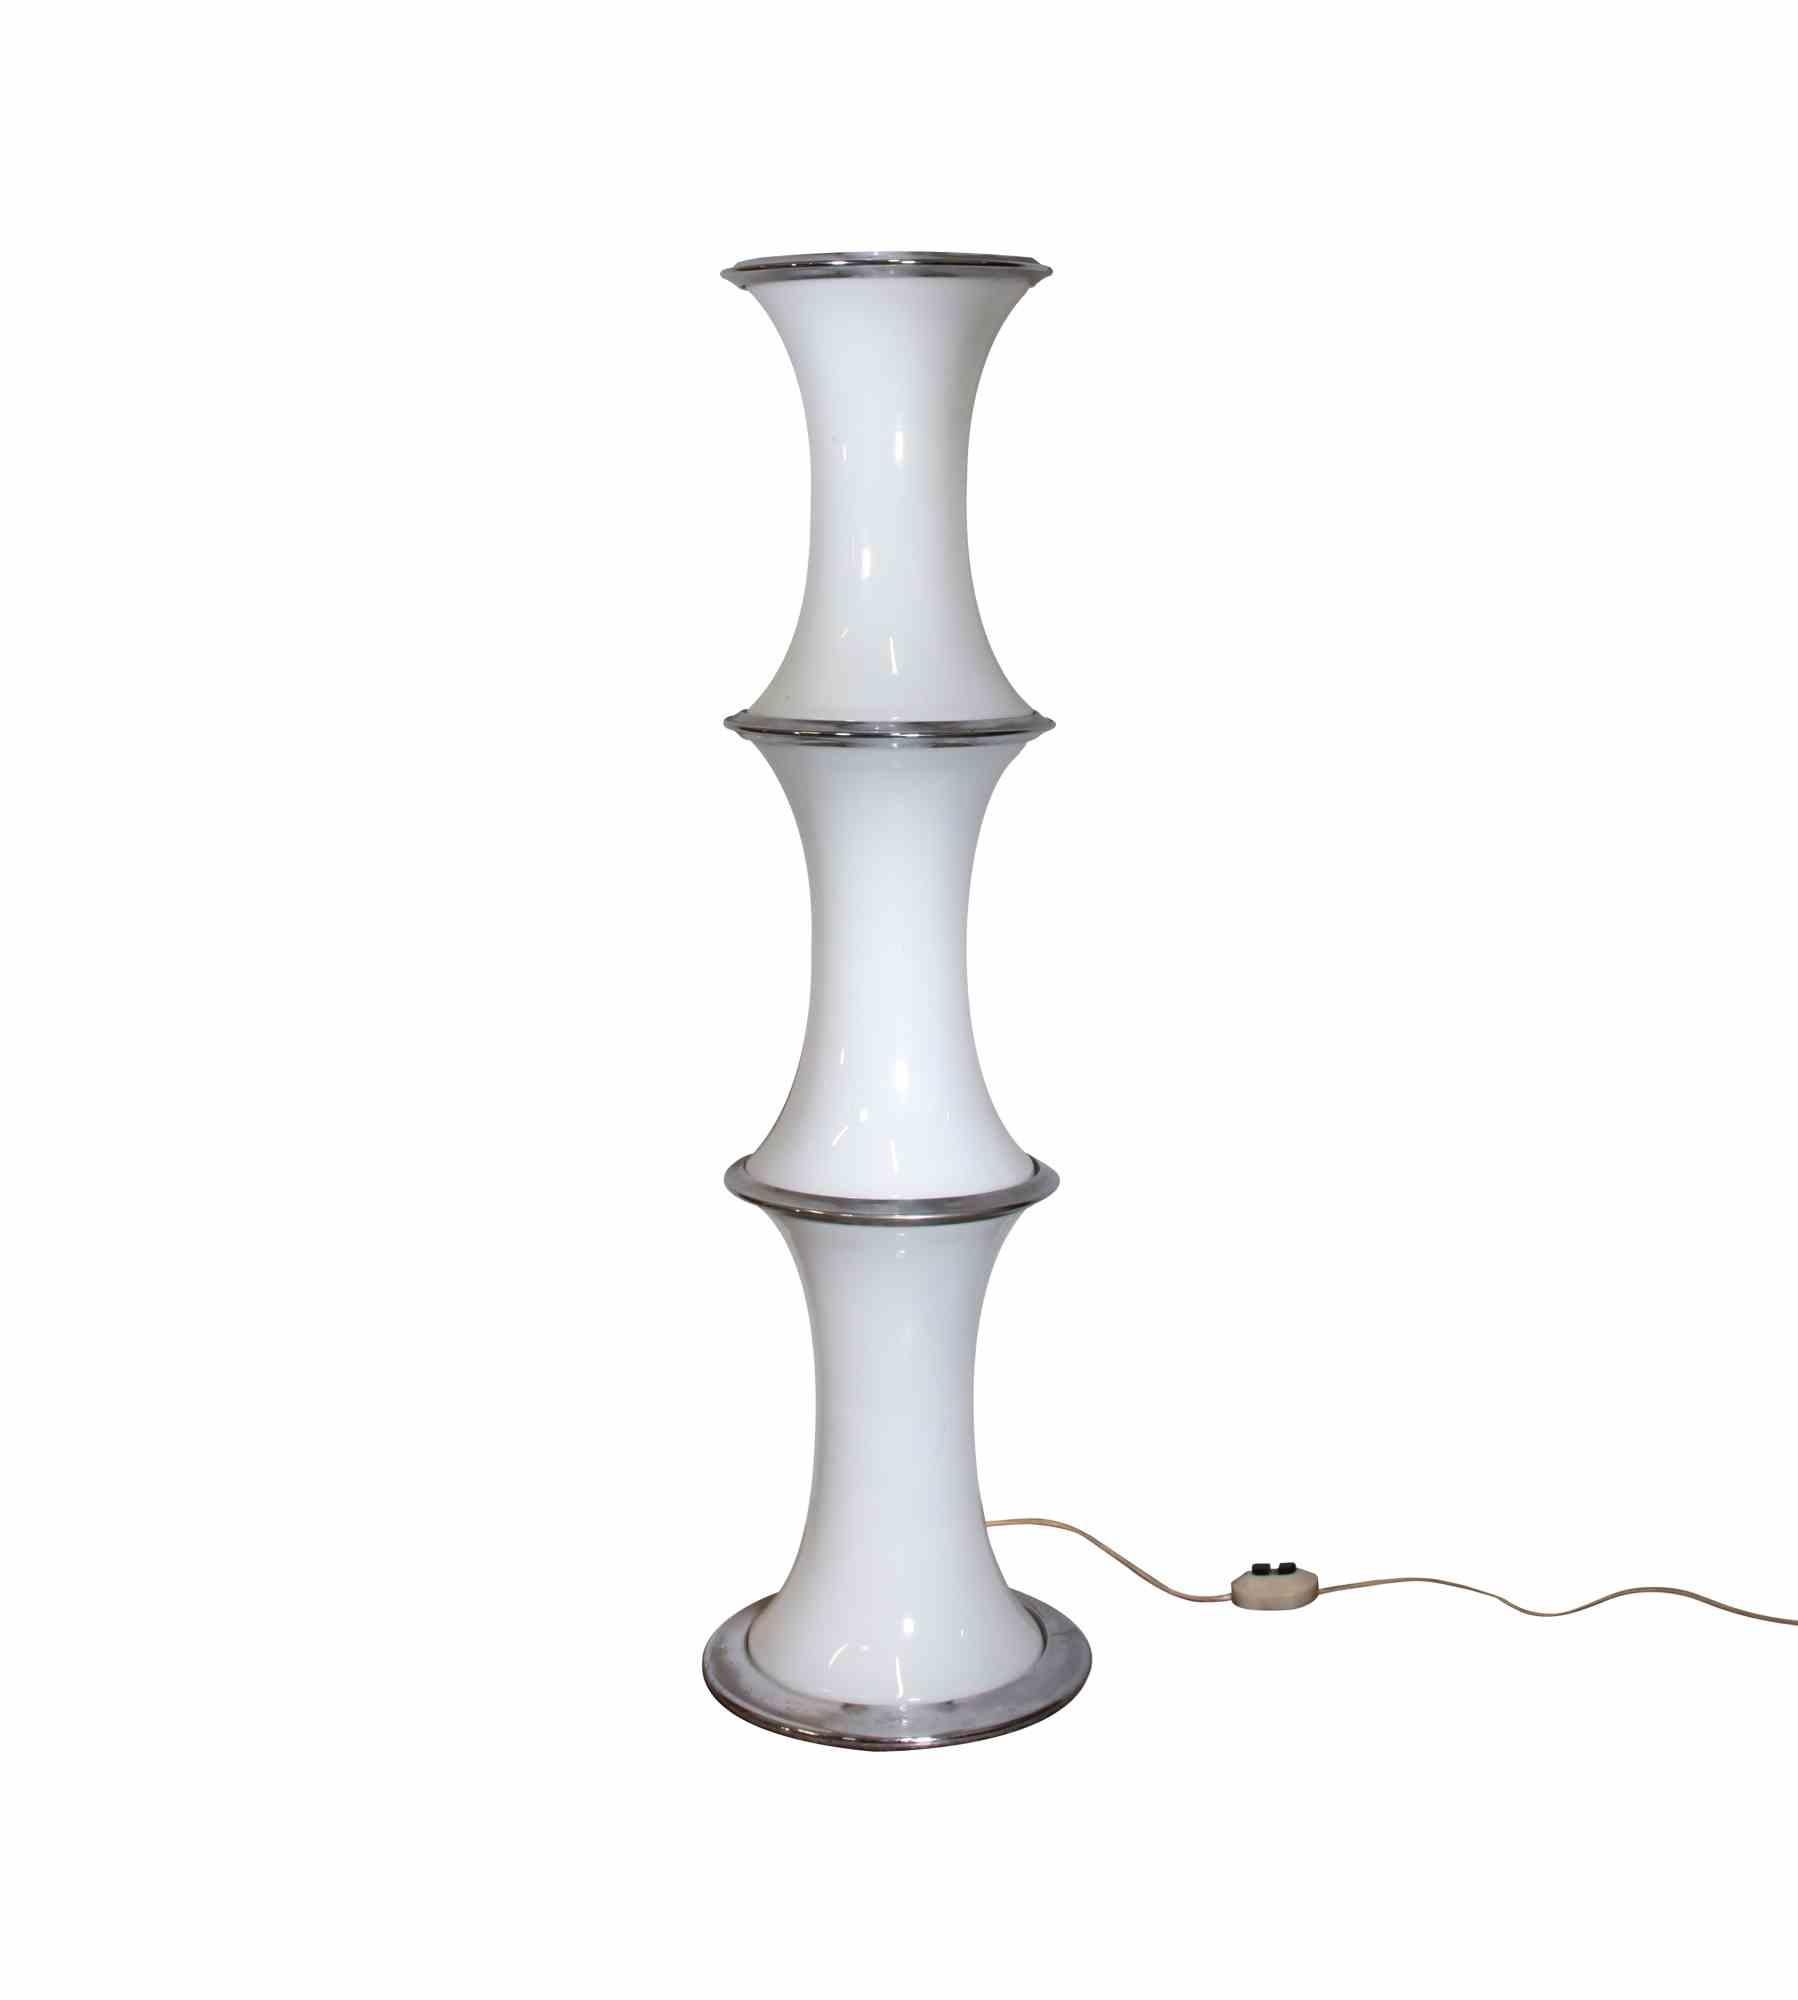 Bamboo floor lamp is an original design lampd designed by Enrico Tronconi for Vistosi in the 1970s

It is made with chromed metal rings and the lampshades are in glass. Rare 4 lampshades specimen.

The lamp is made up of single modules that can